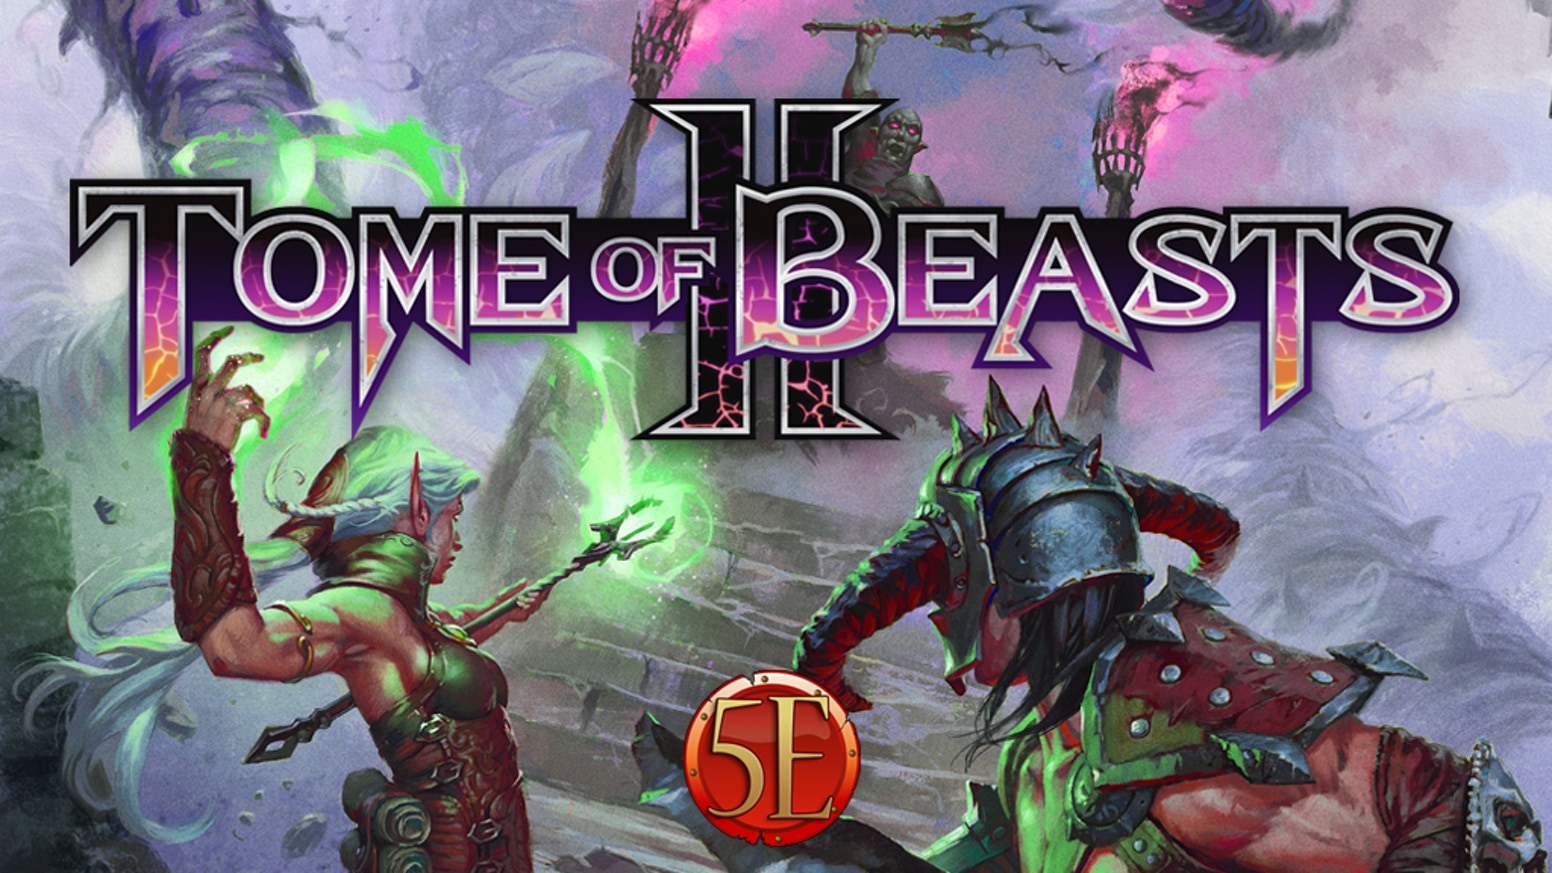 Tome of Beasts 2